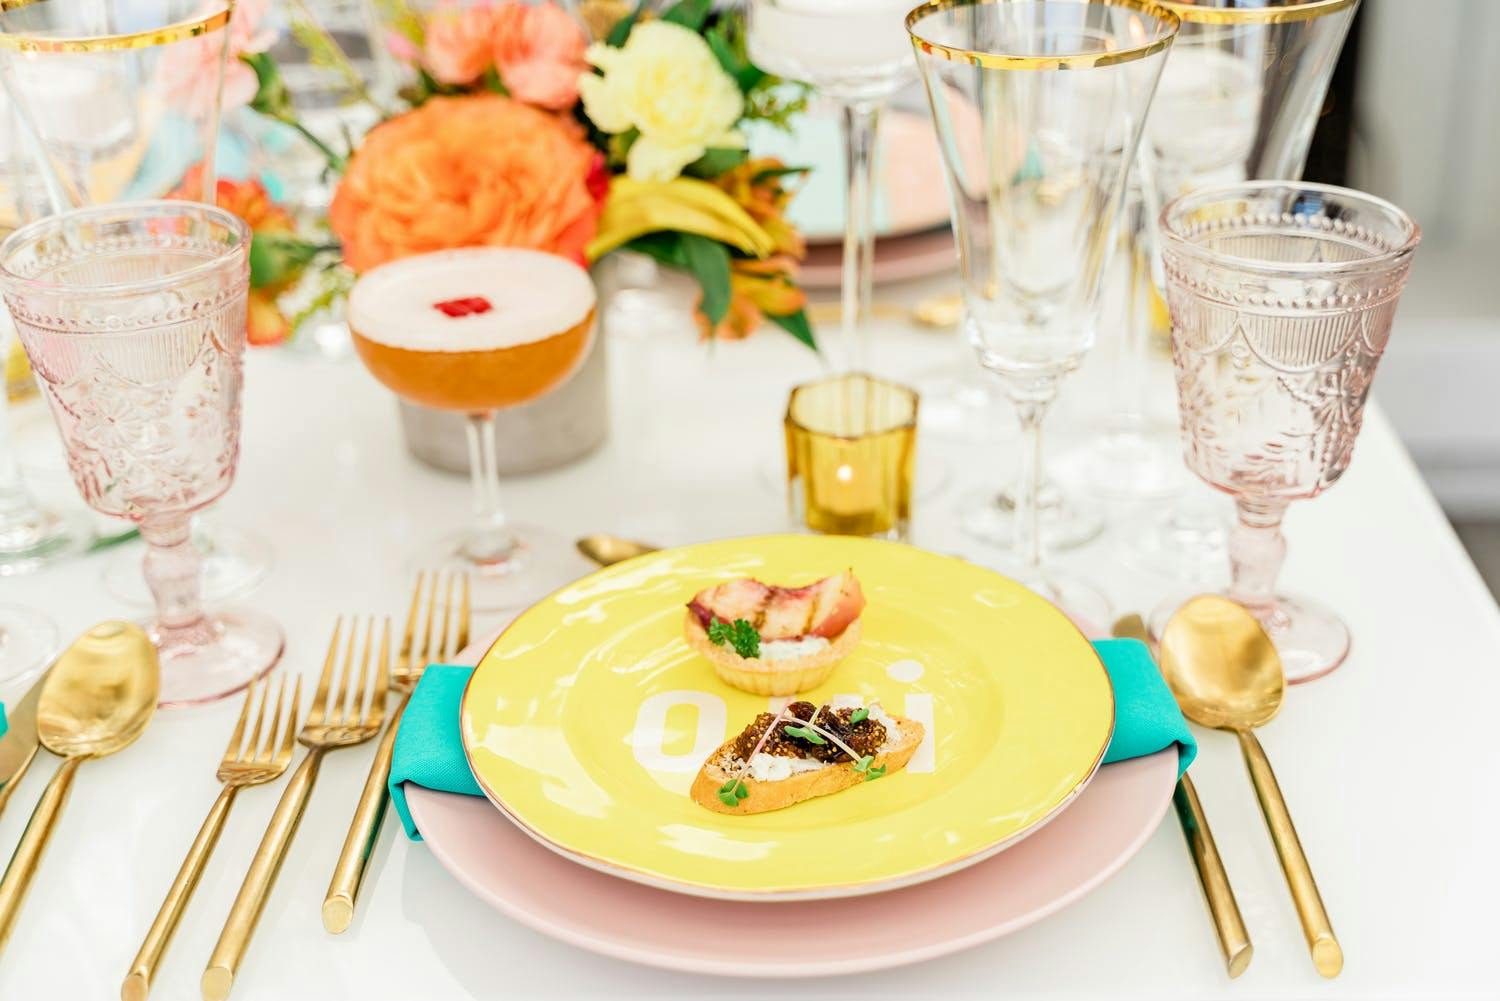 2021 trend eclectic paris theme with yellow plates | PartySlate